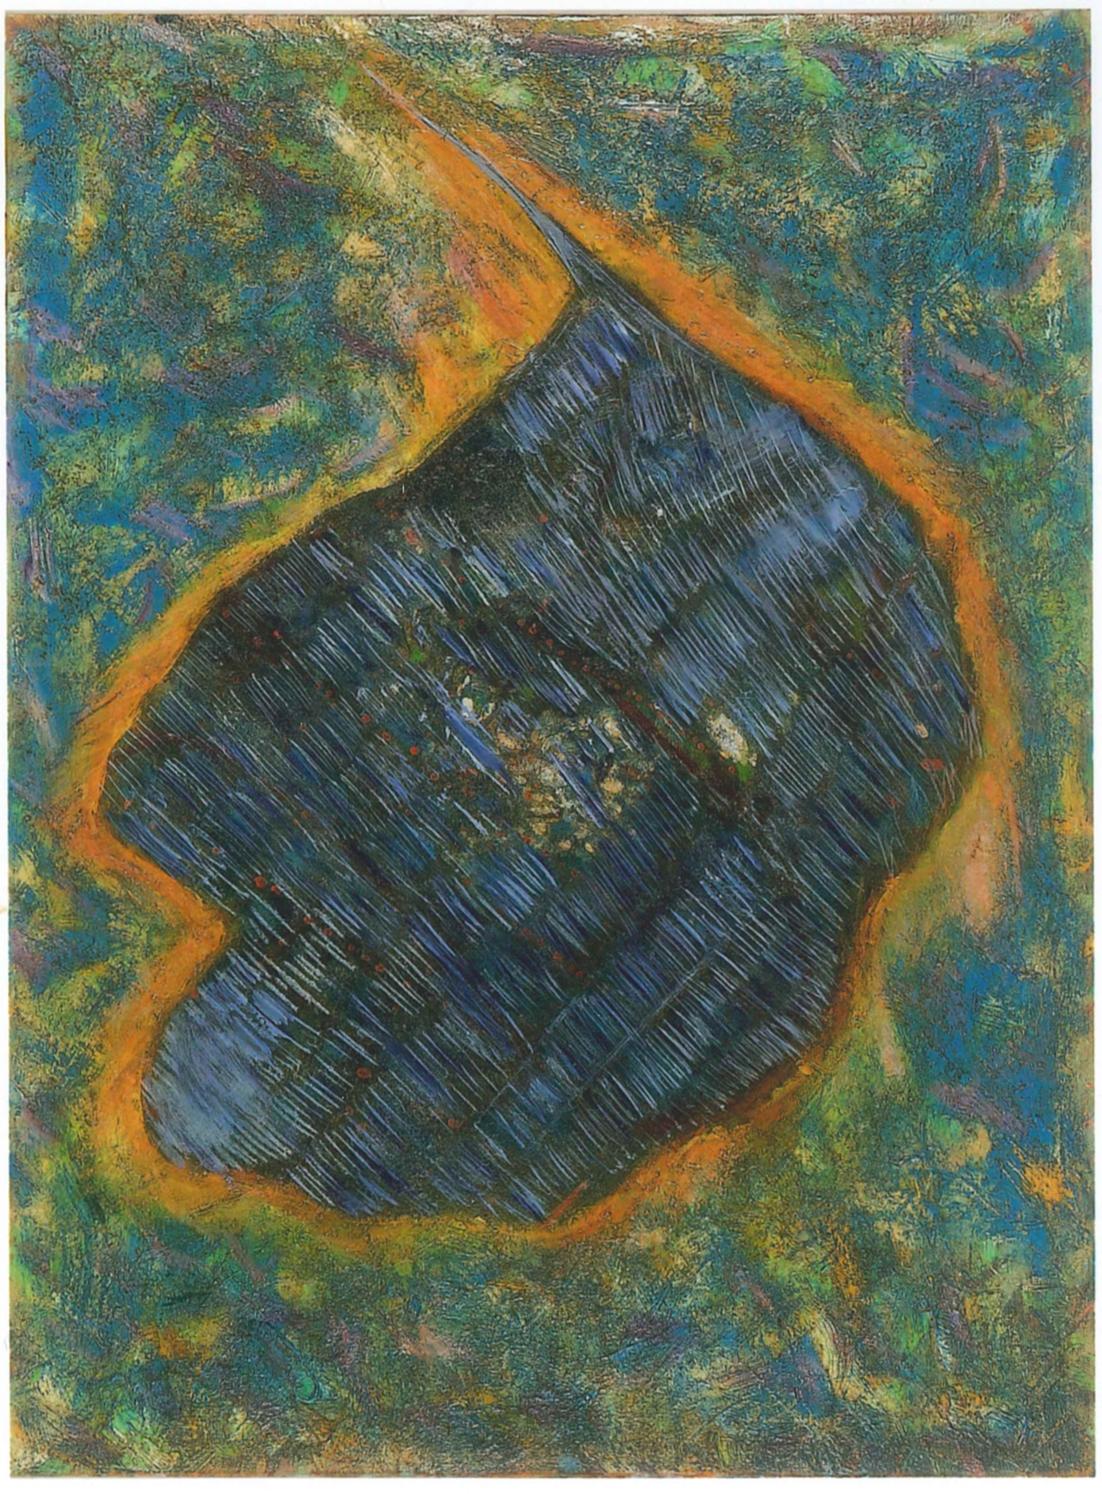 The Last Meteorite is an original artwork realized by Giorgio Lo Fermo in 1998.

Oil on canvas.

This abstract composition is characterized by a central shape that reminds to a meteorite: the colors blue and dark green create a lovely contrast. The